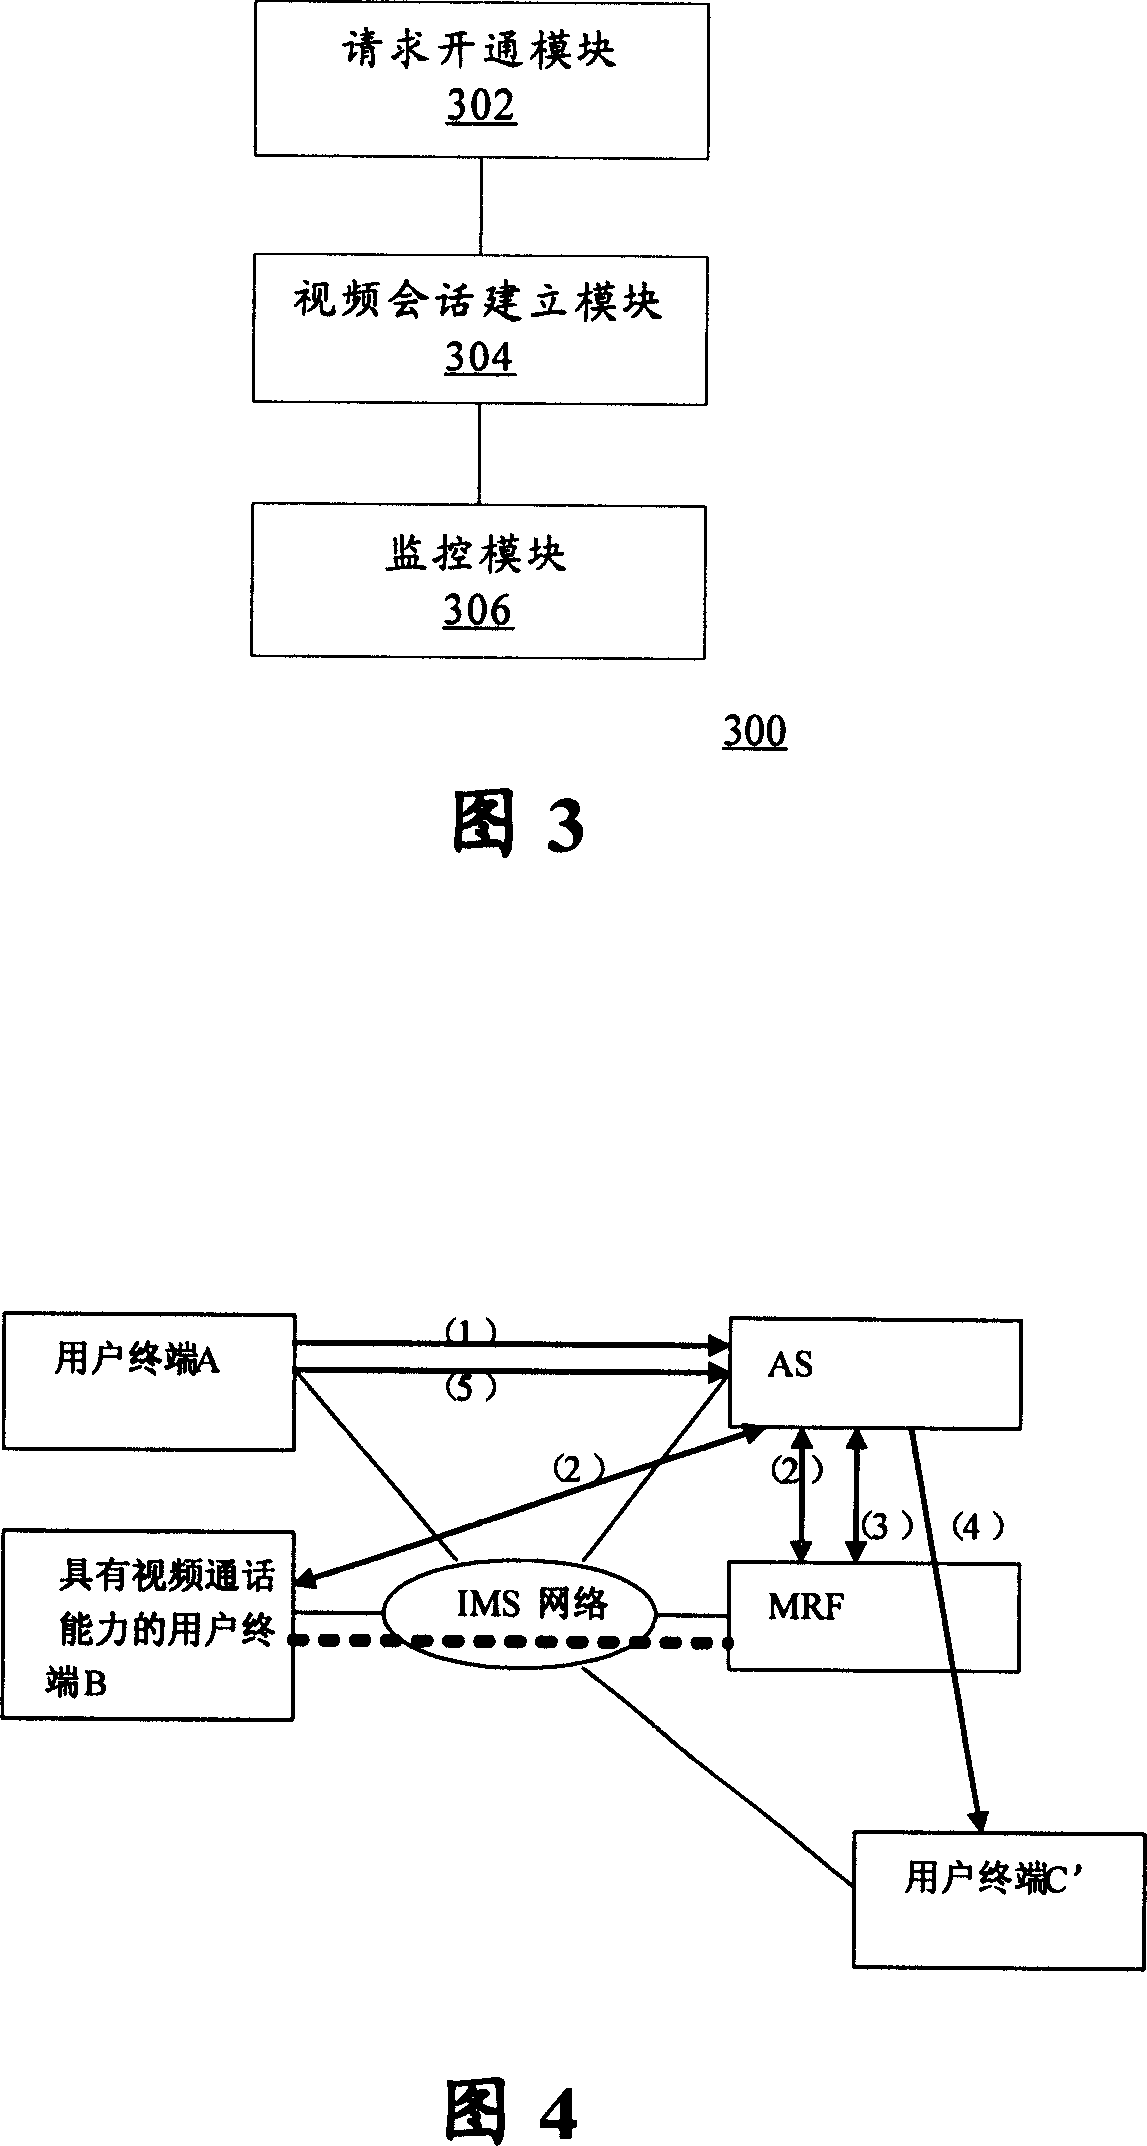 Video monitoring method and apparatus for on-demand application